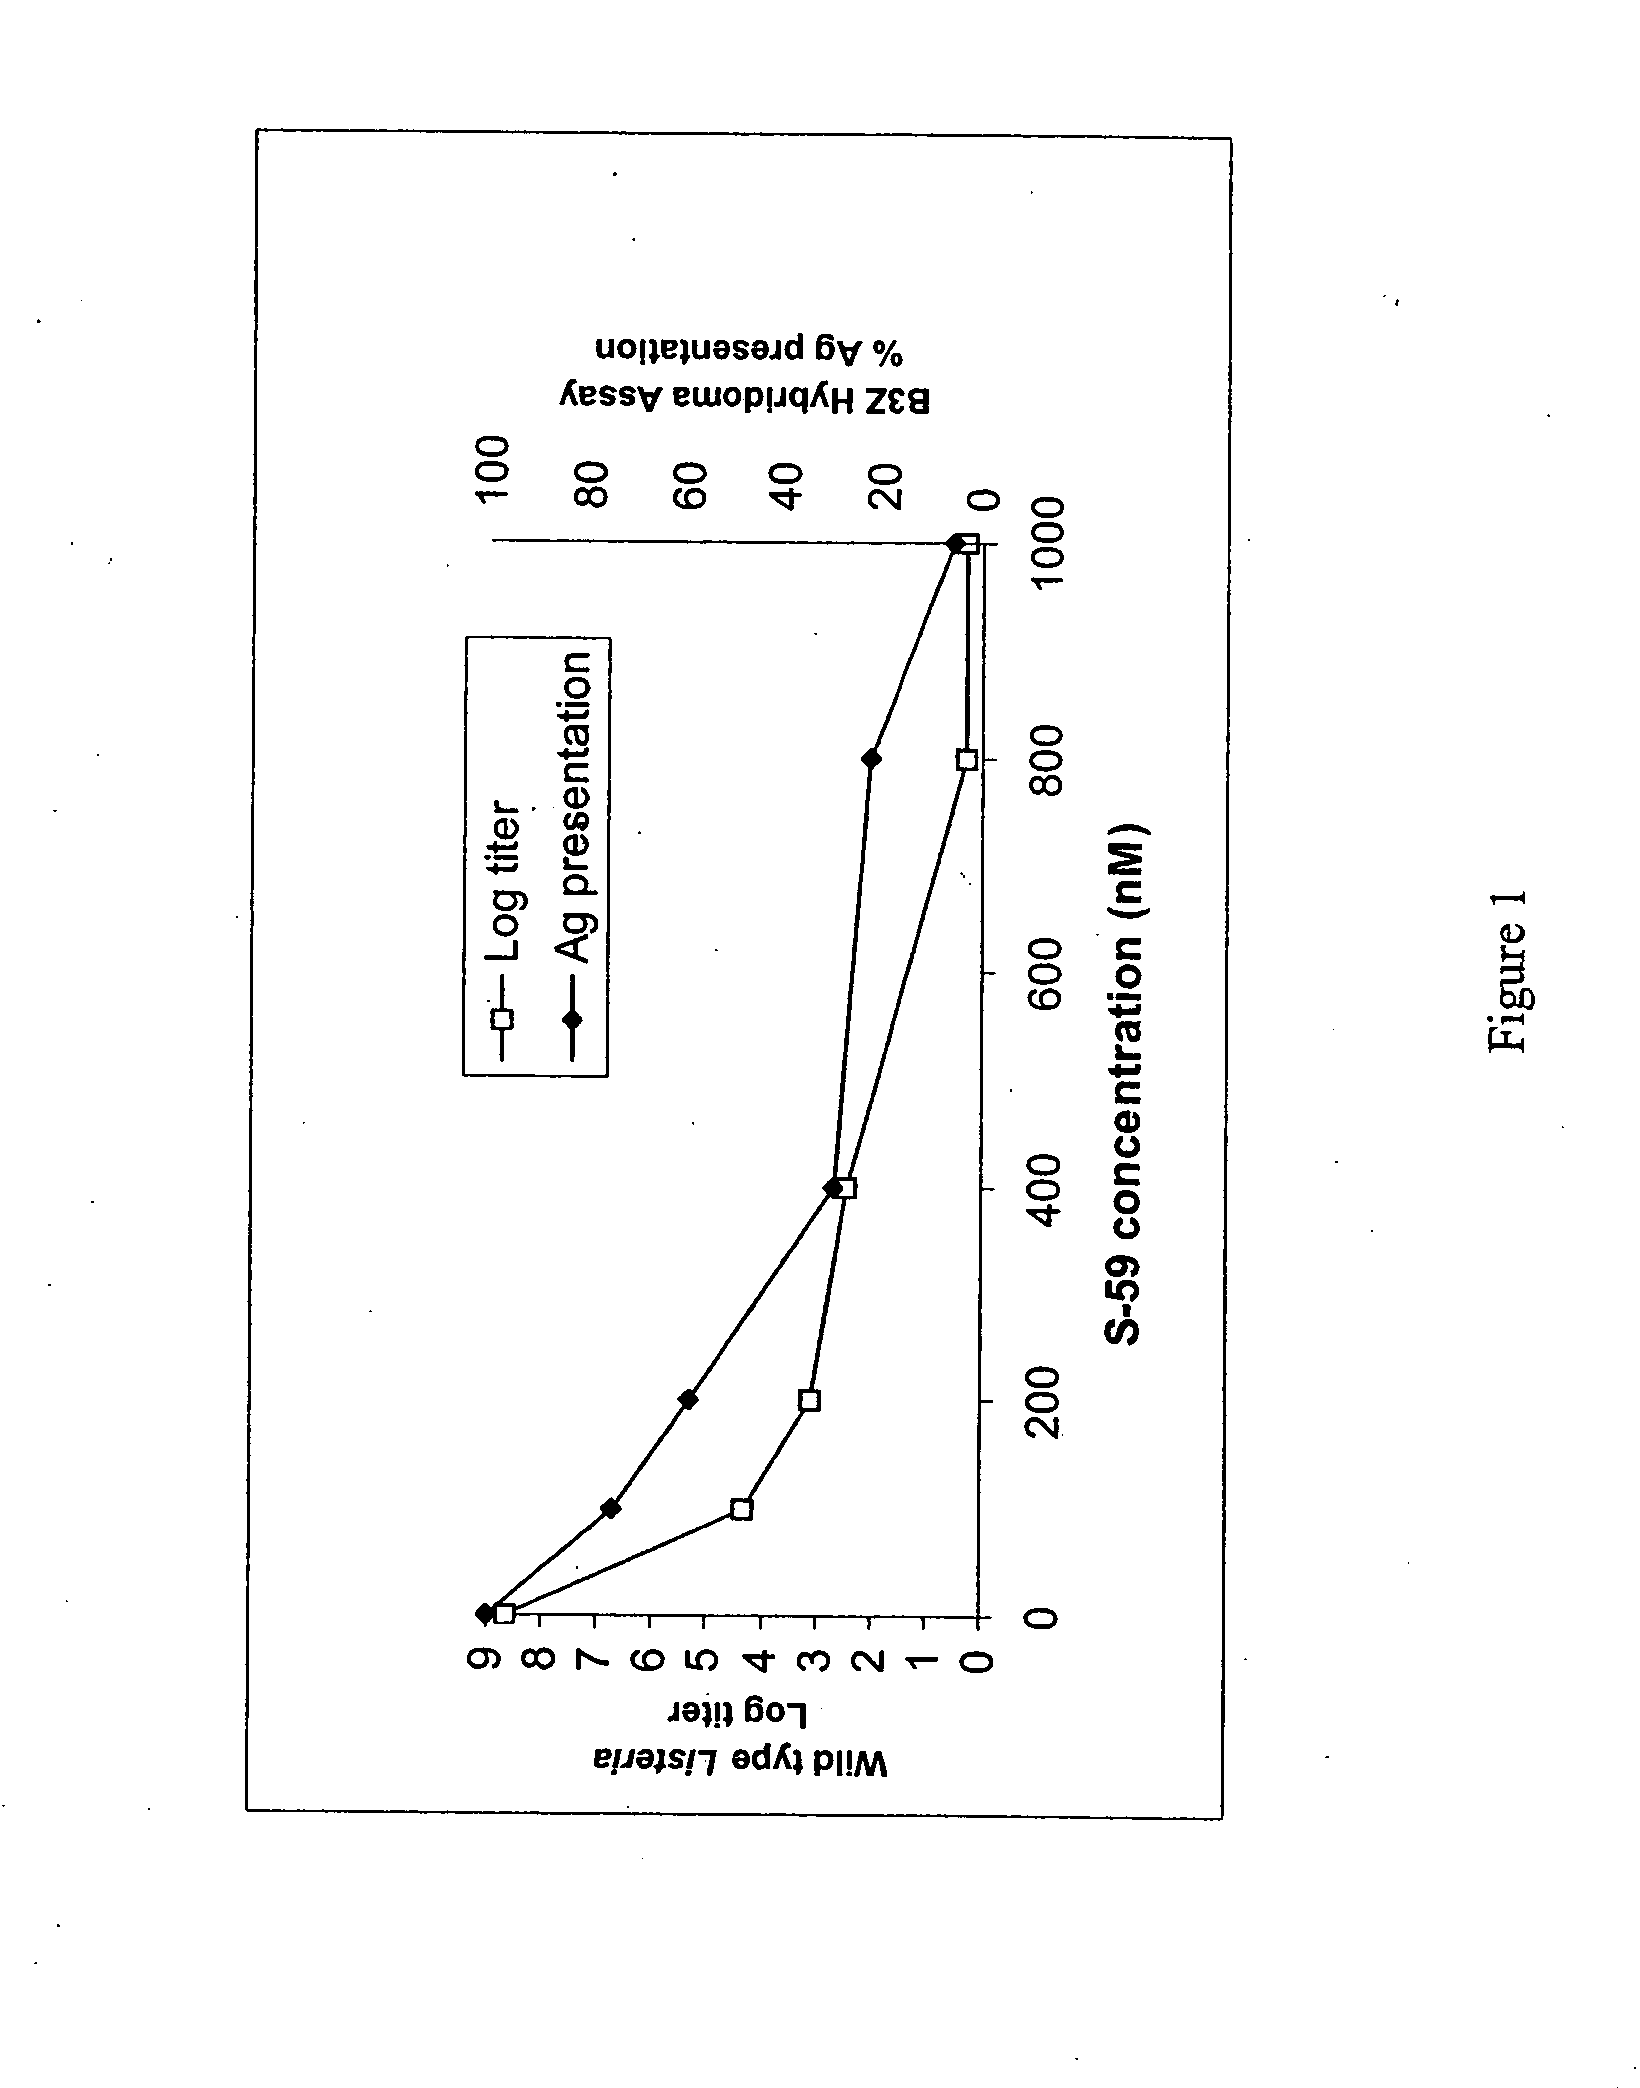 Modified free-living microbes, vaccine compositions and methods of use thereof